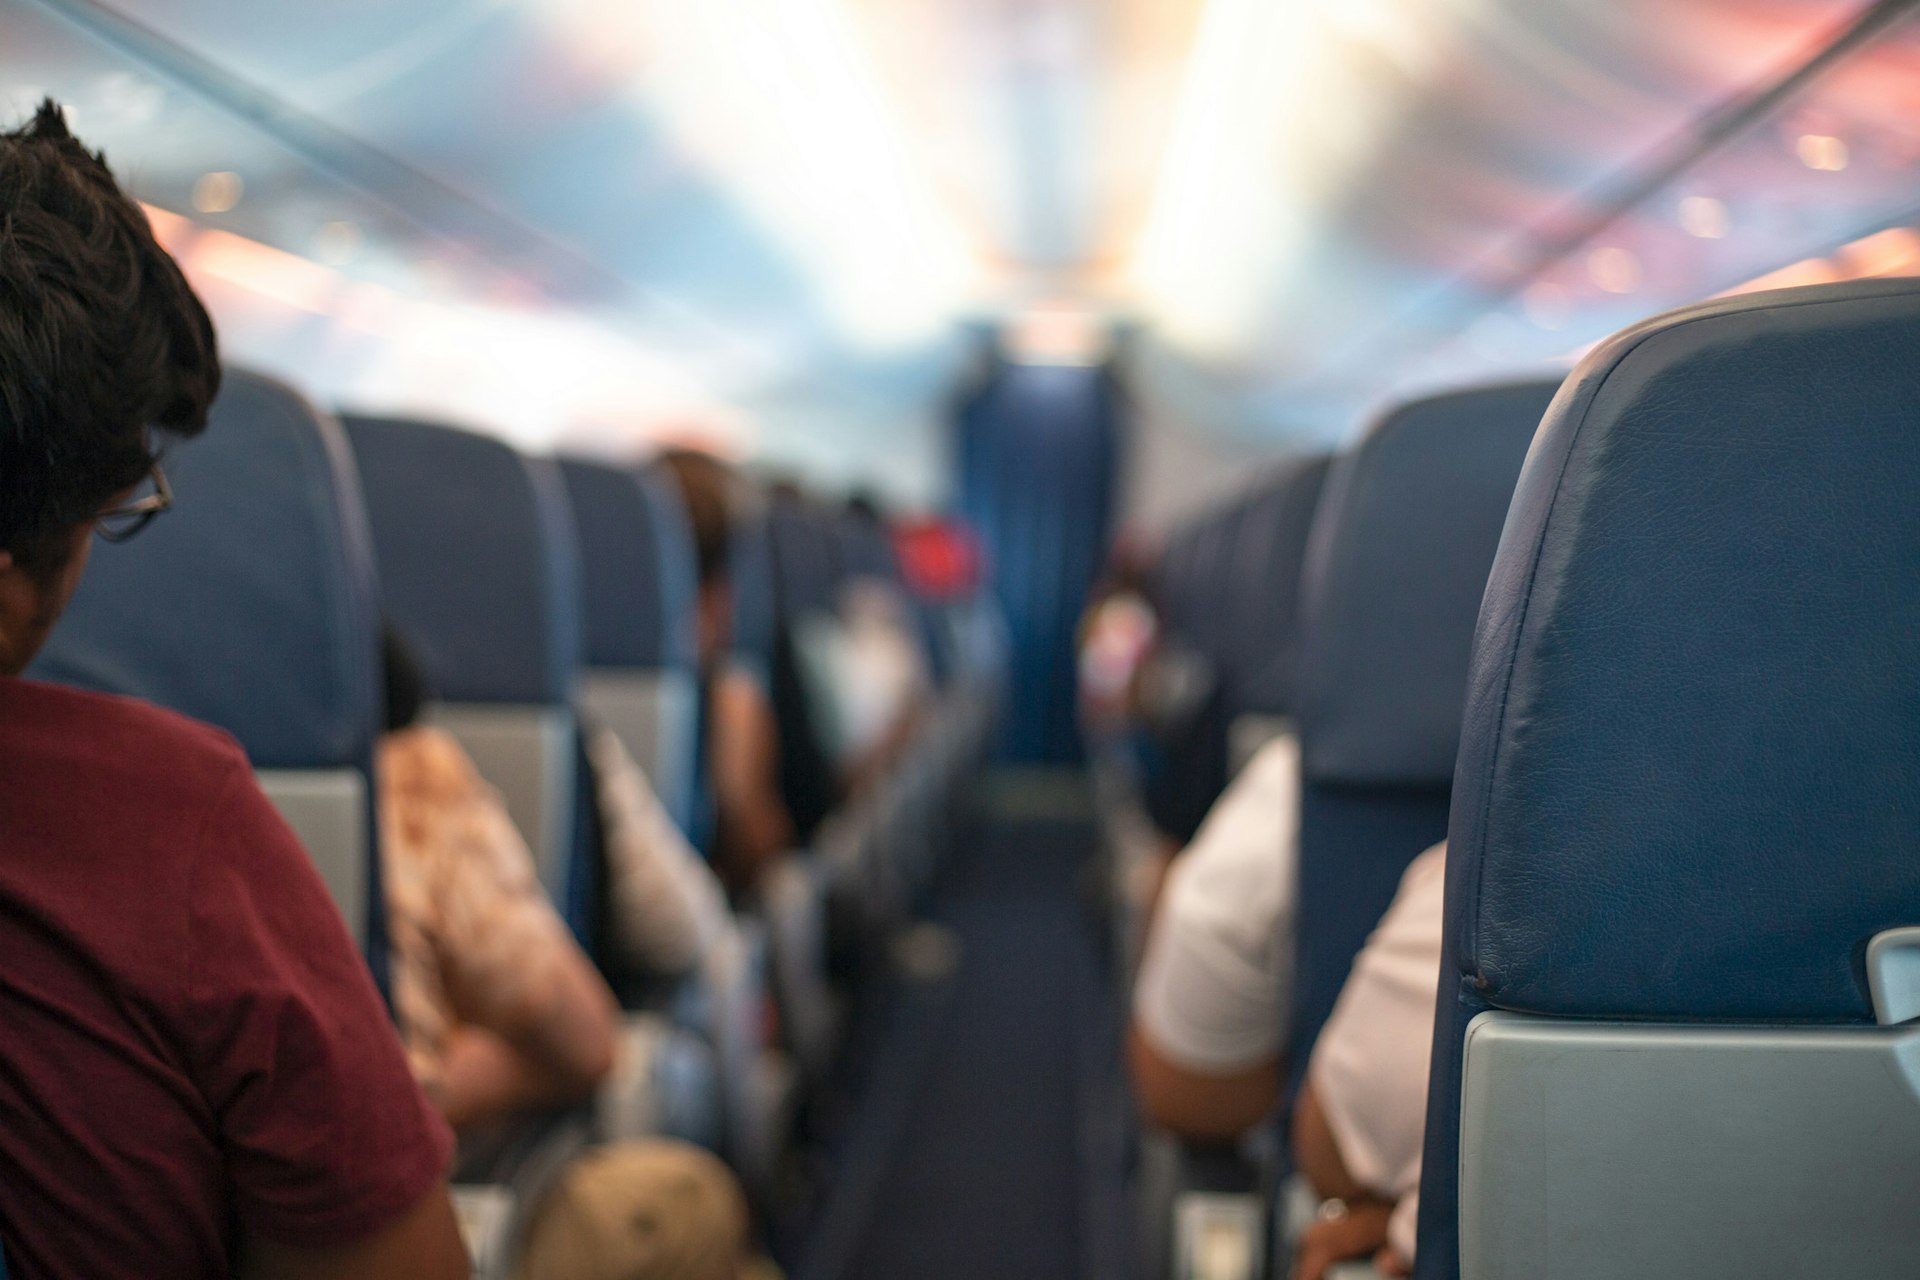 The view from an aisle as passengers sit in aircraft seats.